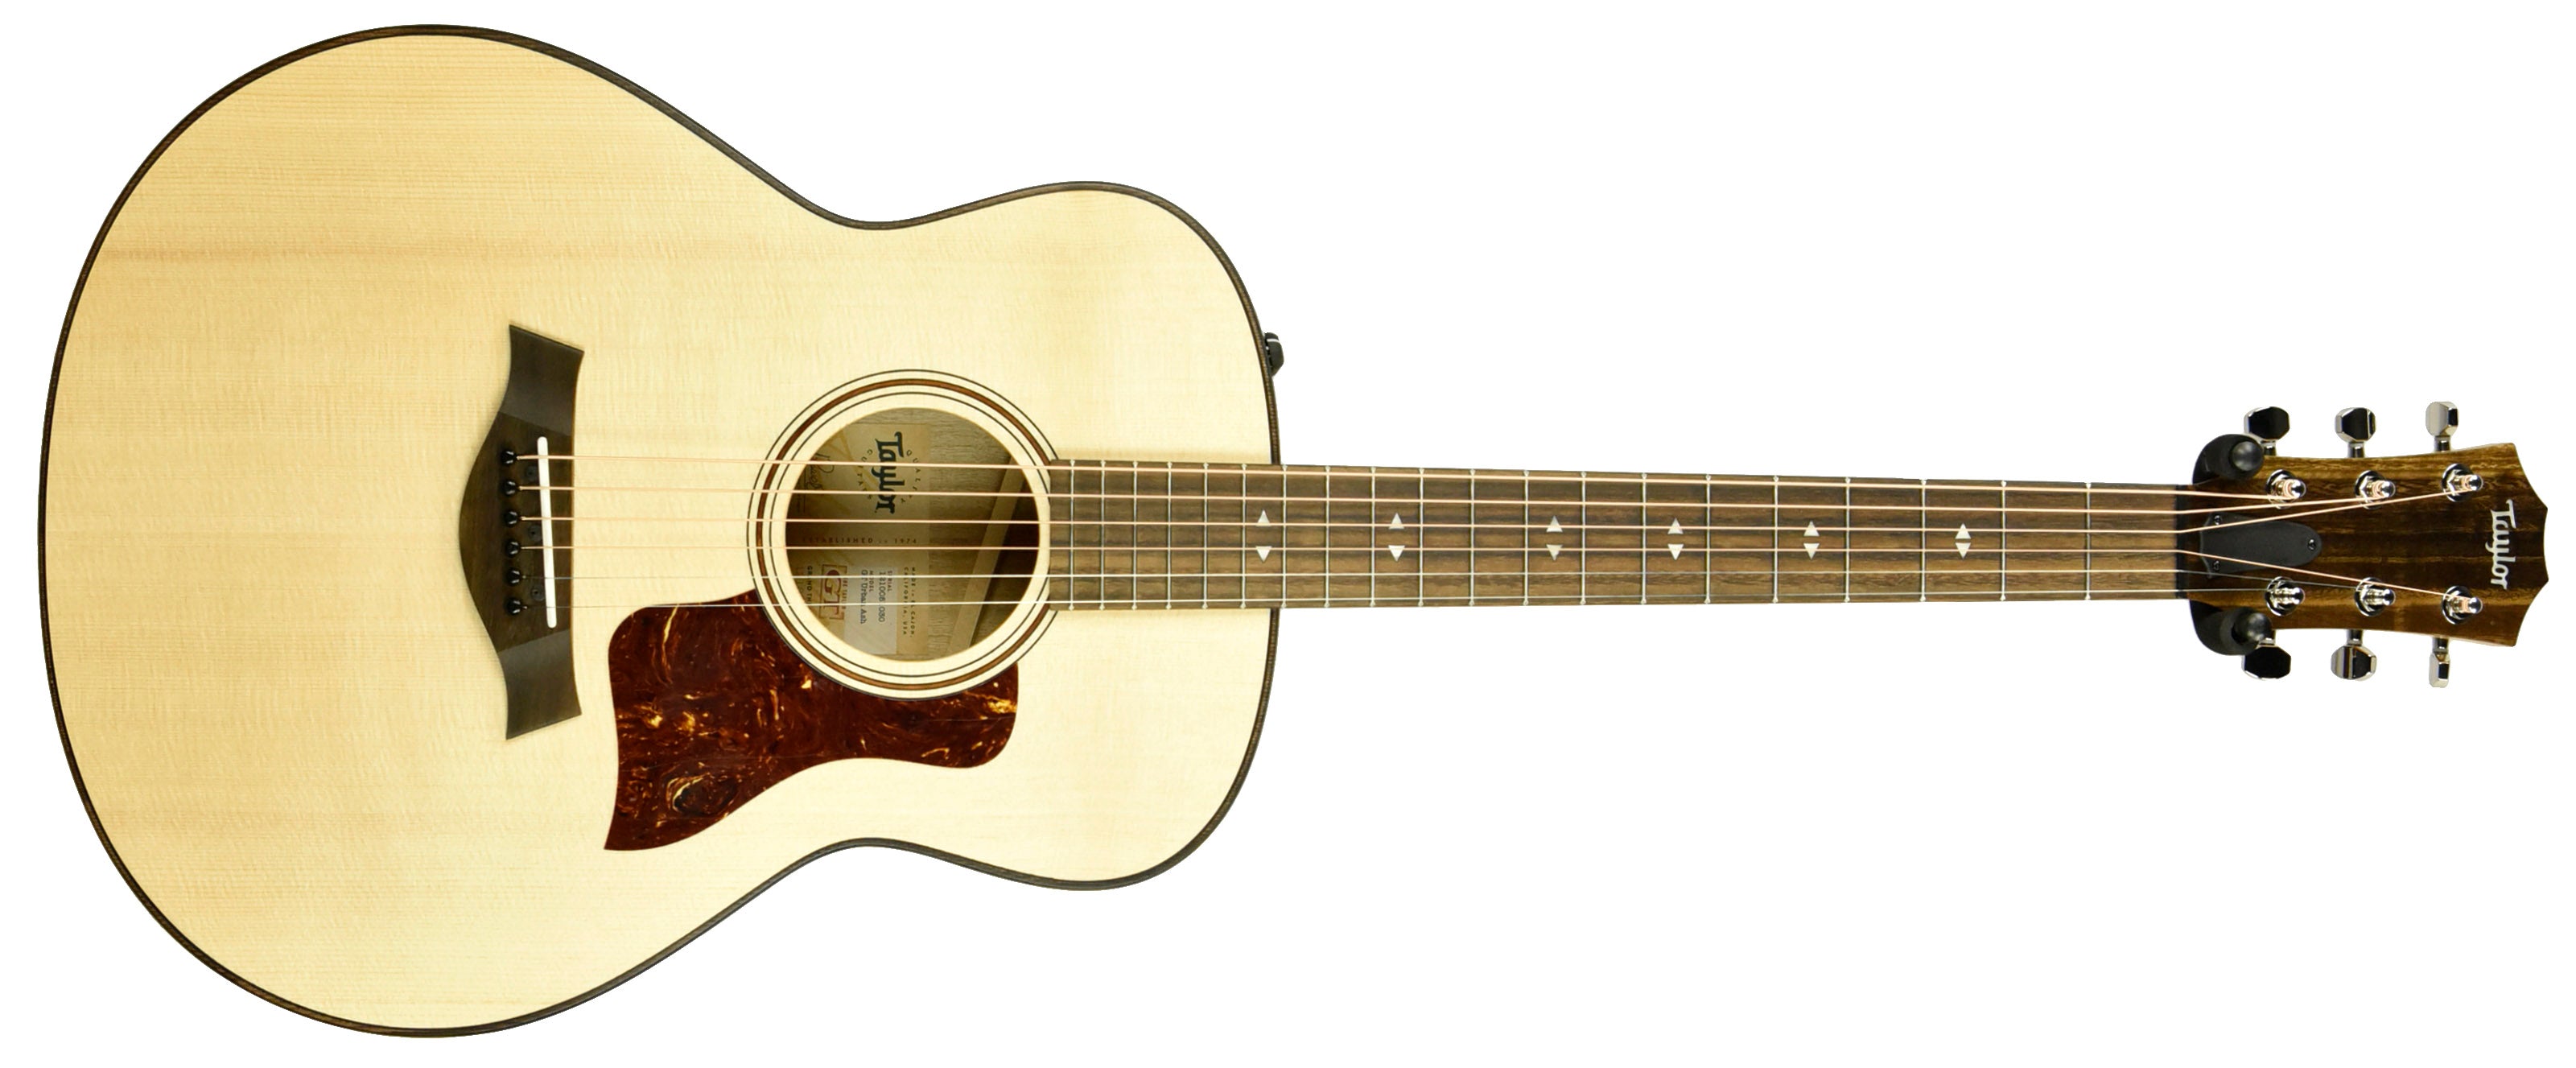 Taylor GTe Urban Ash Acoustic-Electric Guitar in Natural 